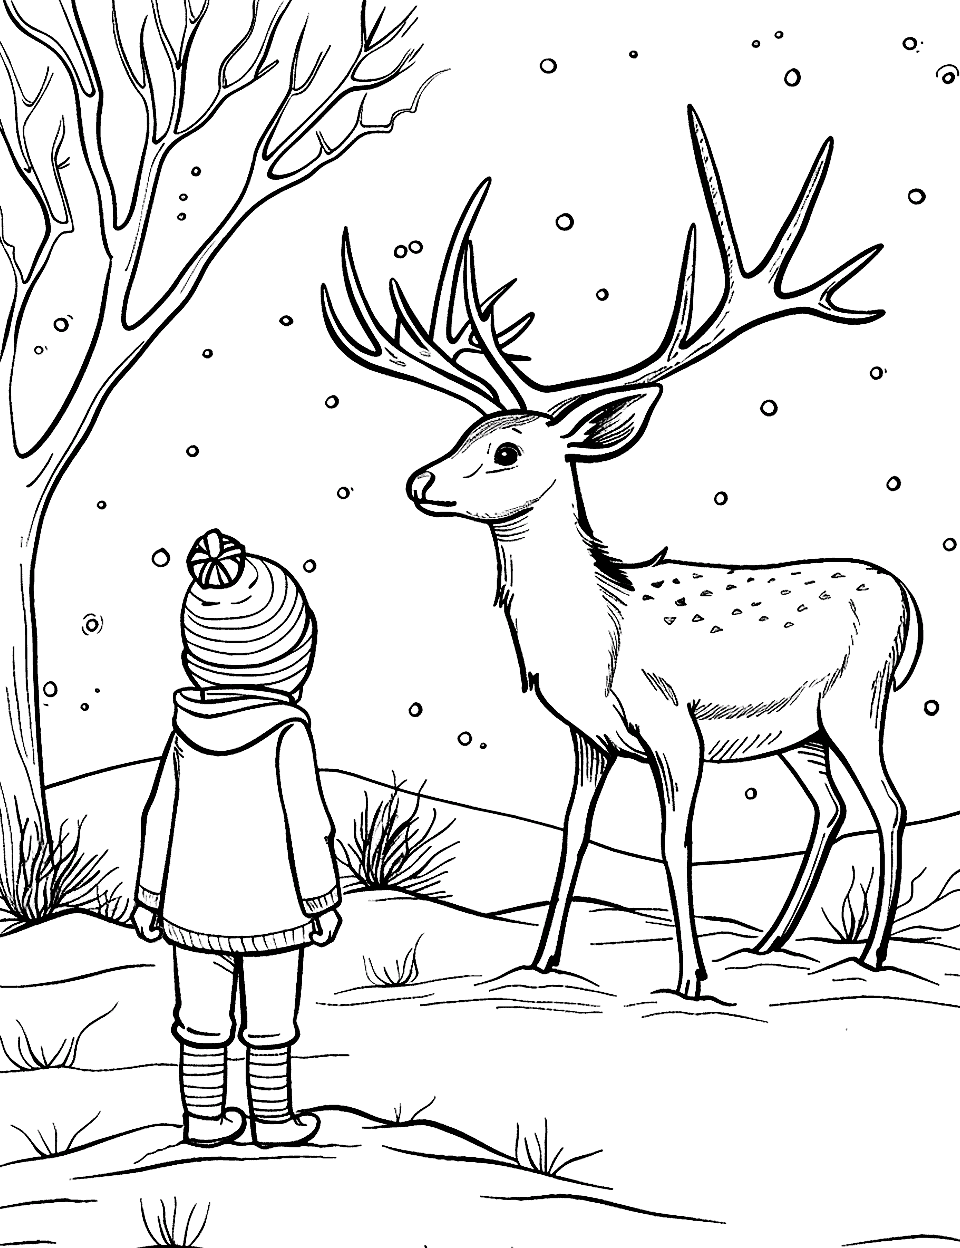 35 Deer Coloring Pages: Free Printable Sheets